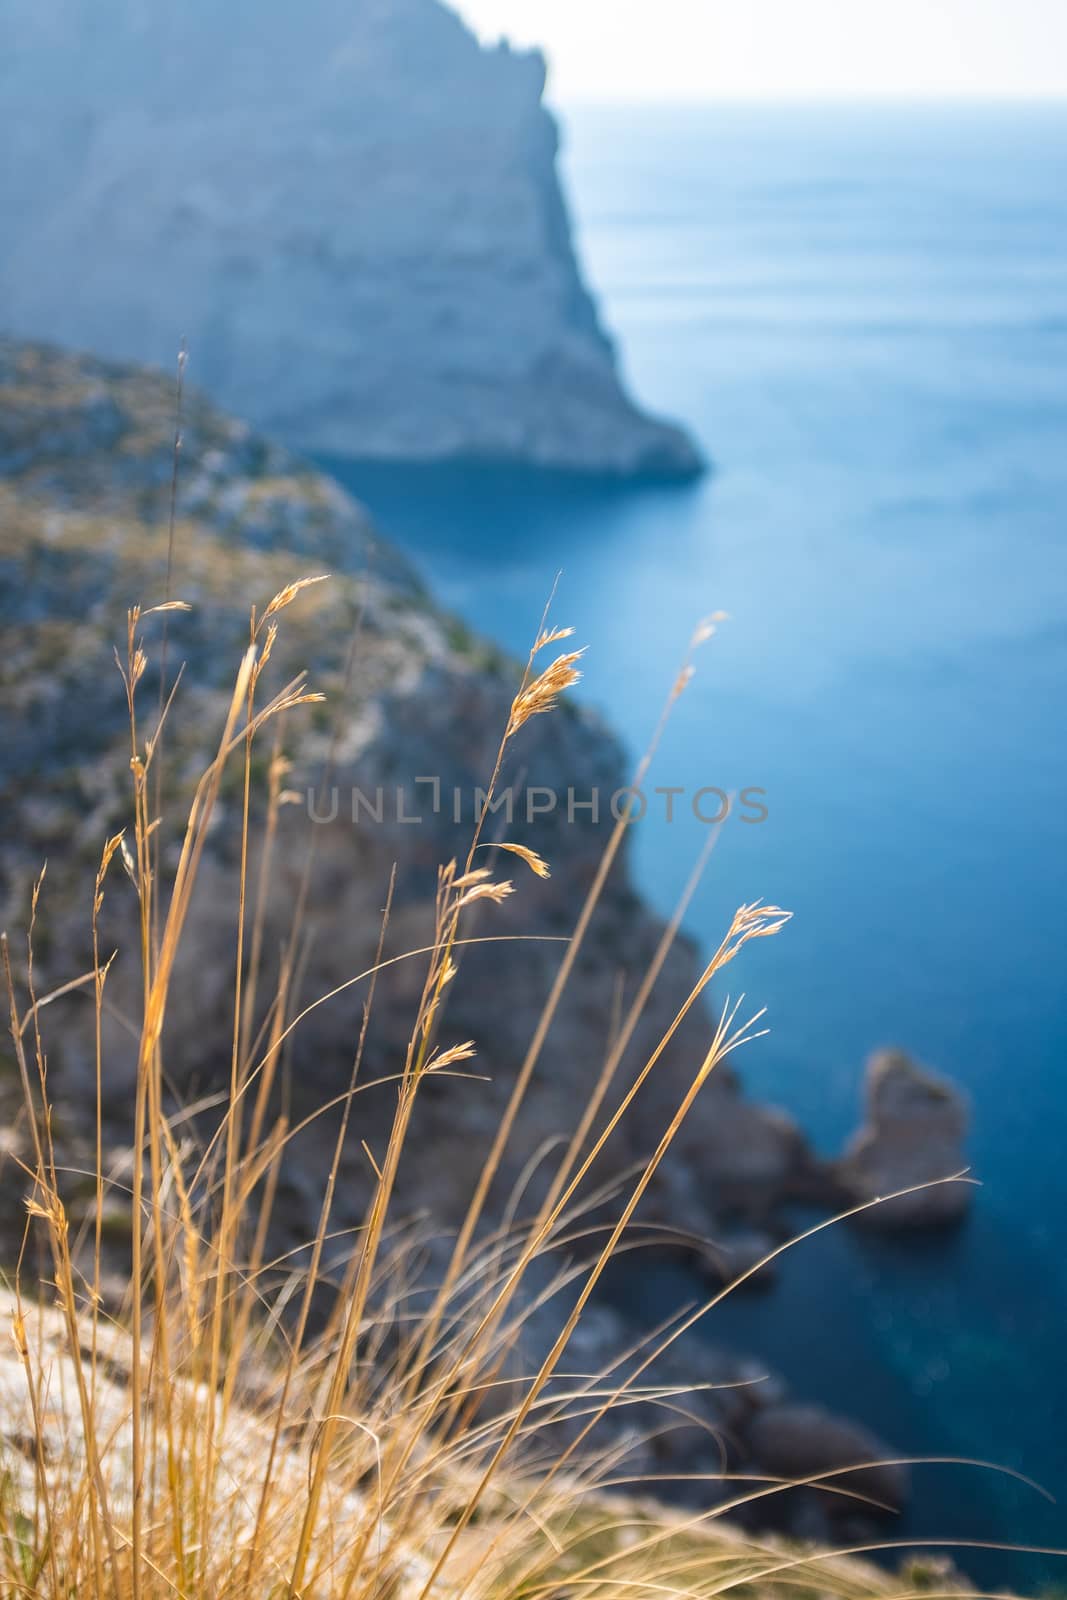 Dramatic Cliffs By The Mediterranean Sea In Mallorca, Spain With Grass In The Foreground